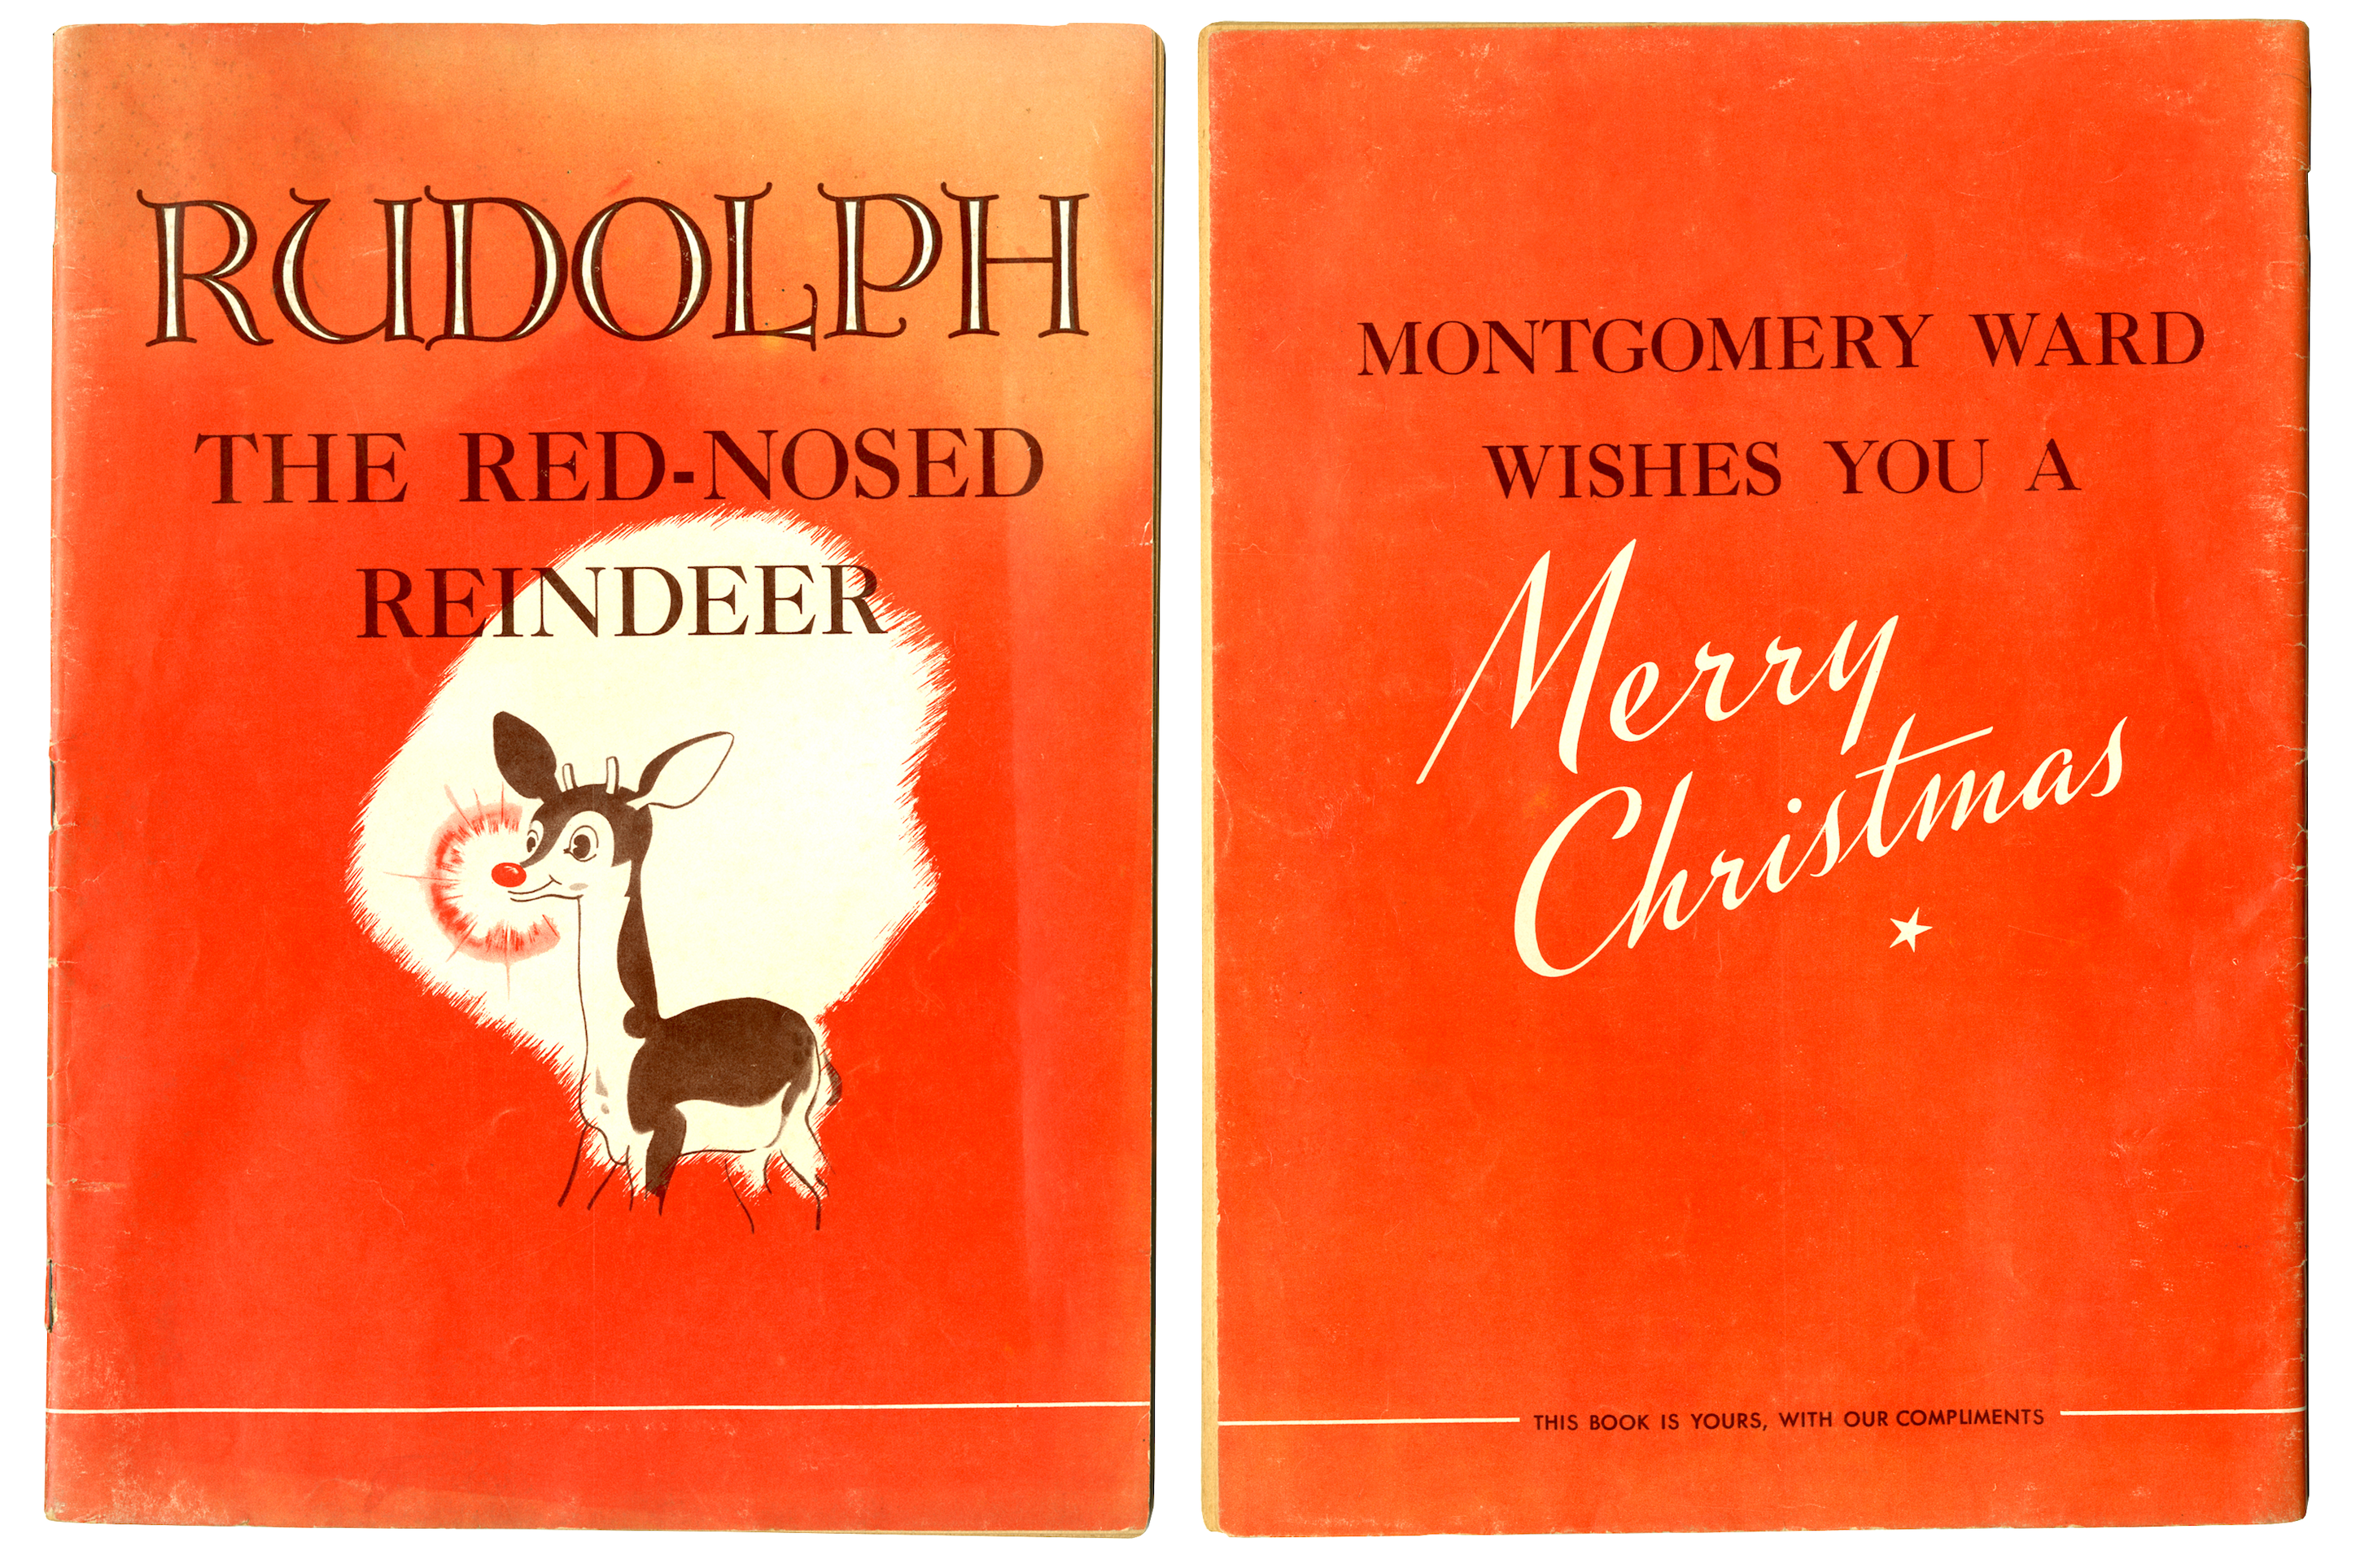 http://www.madeinchicagomuseum.com/wp-content/uploads/2021/12/ward-rudolph-book-scan.png